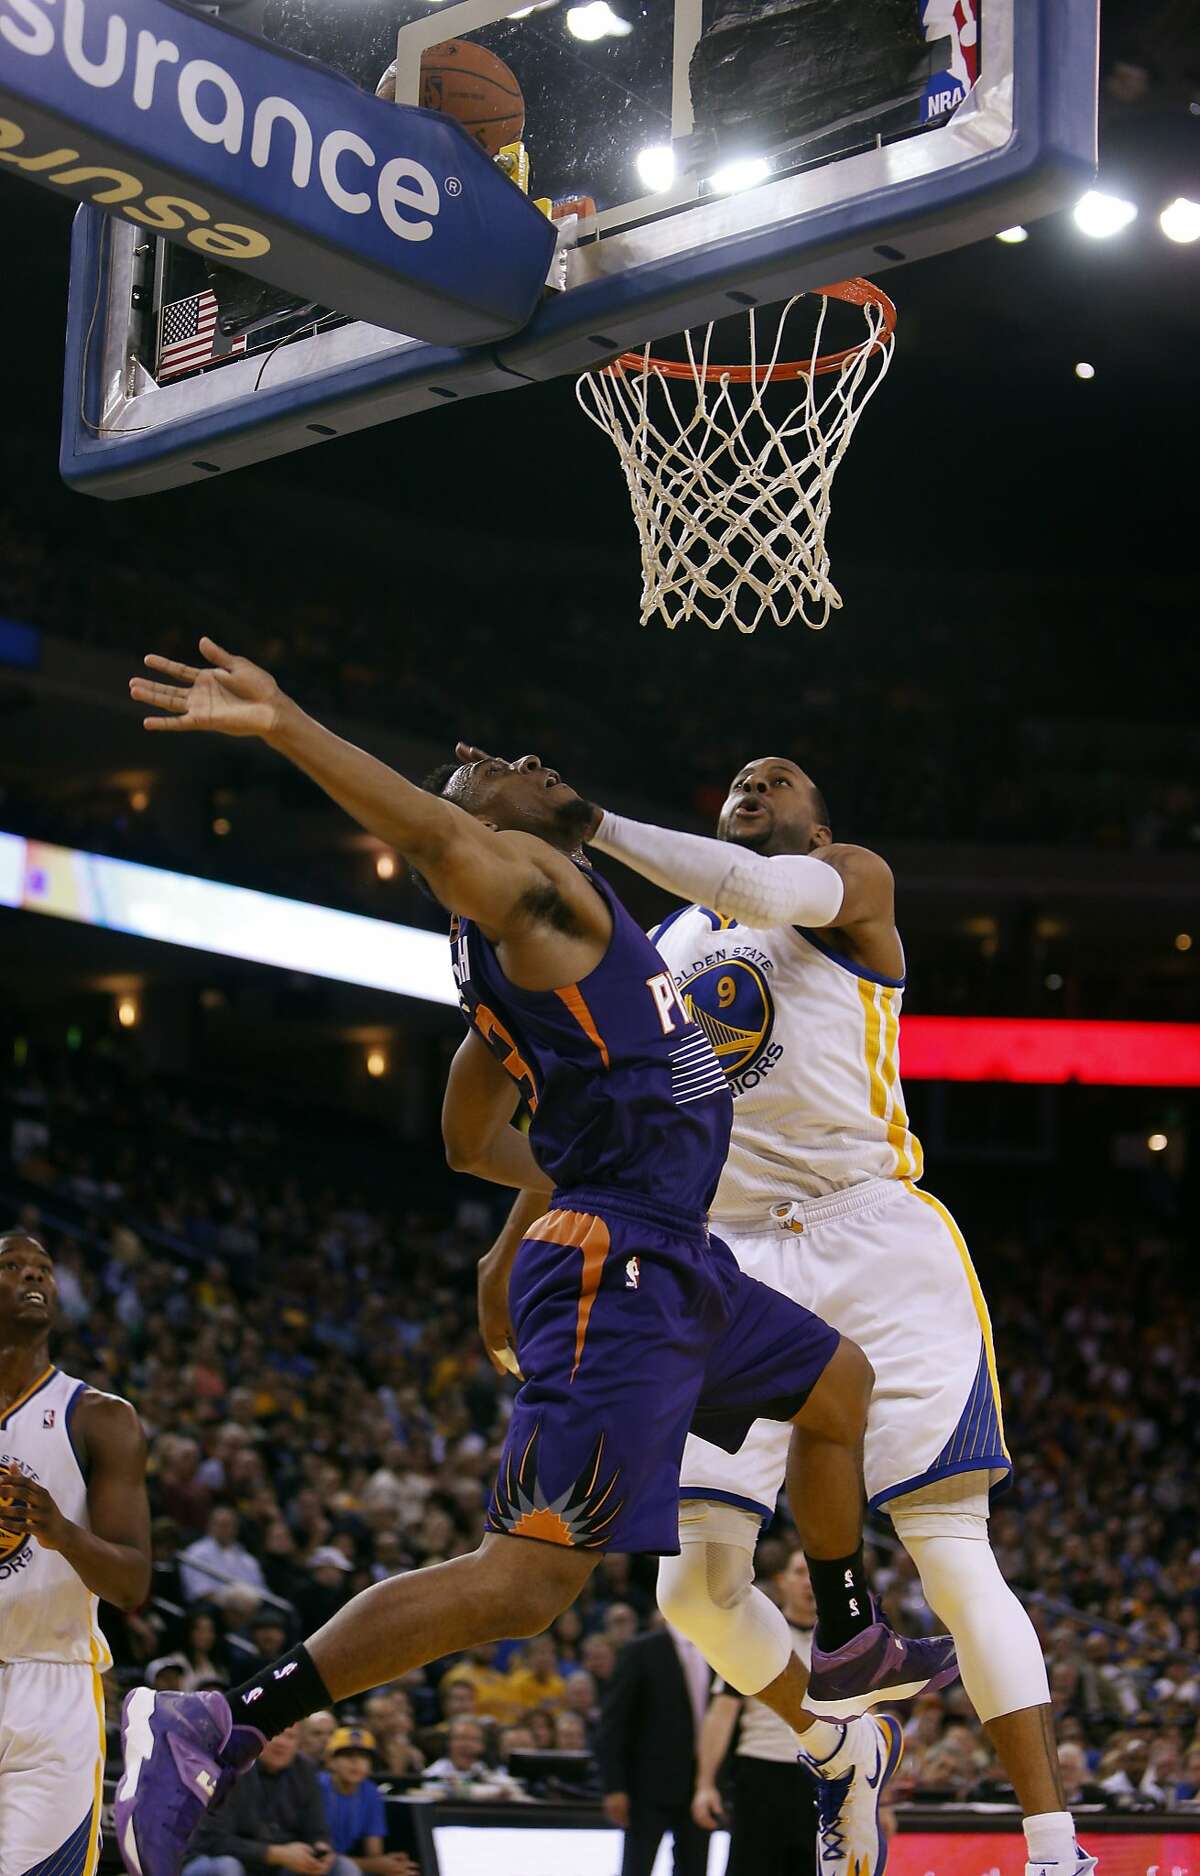 Andre Iguodala defends against Ish Smith in the second half. The Golden State Warriors played the Phoenix Suns at Oracle Arena in Oakland, Calif., on Sunday, March 9, 2014.